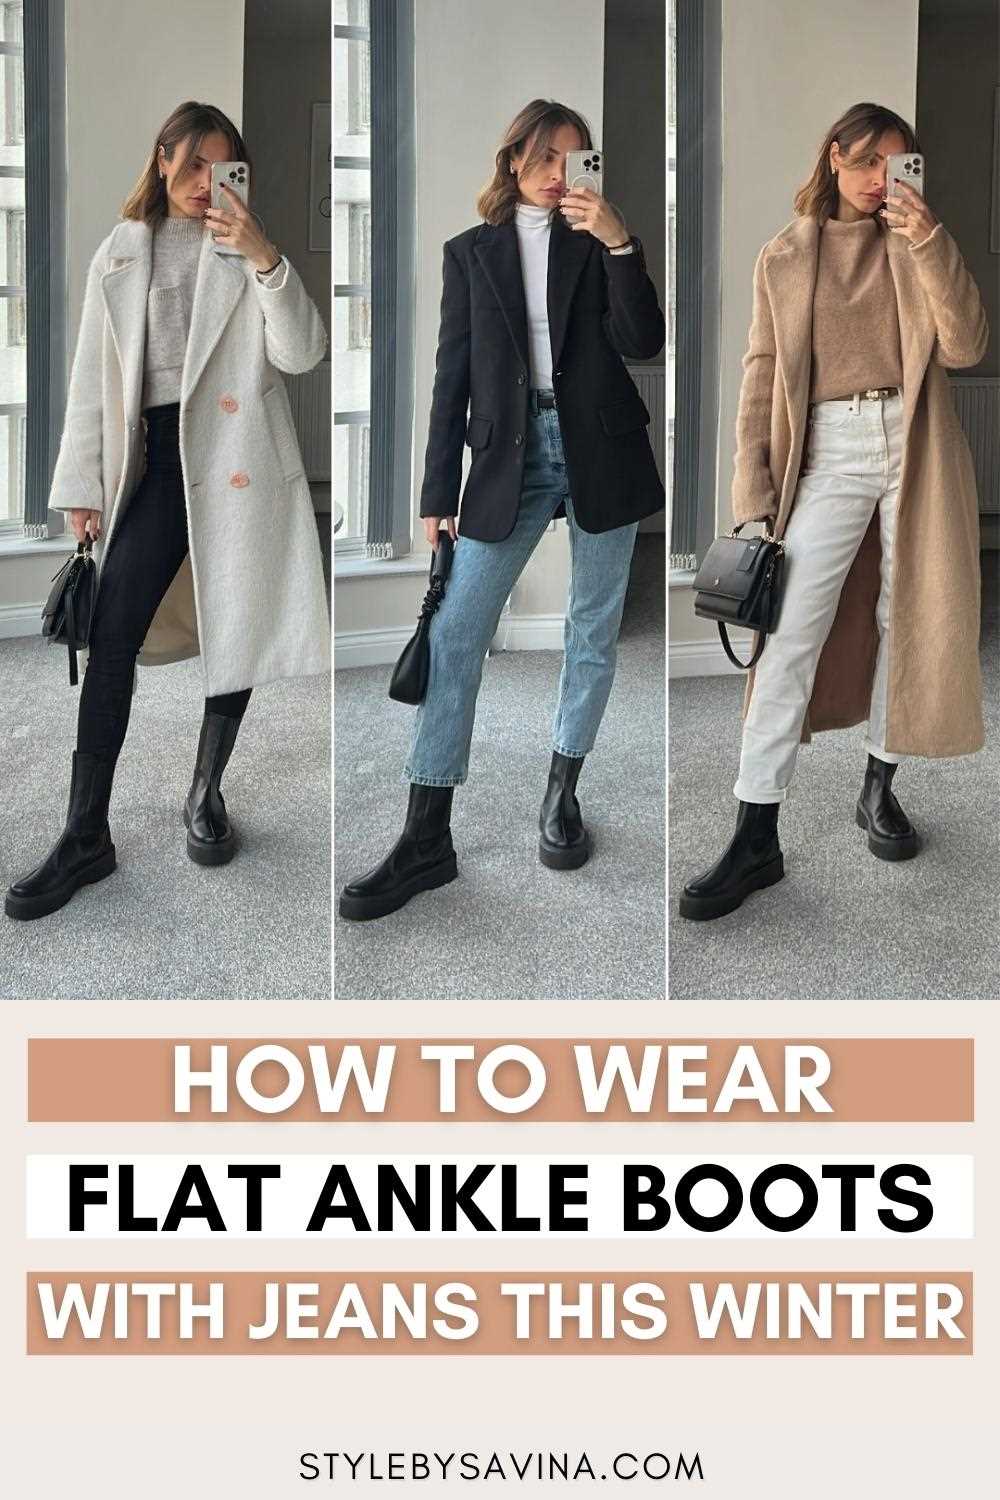 How to wear ankle boots with pants